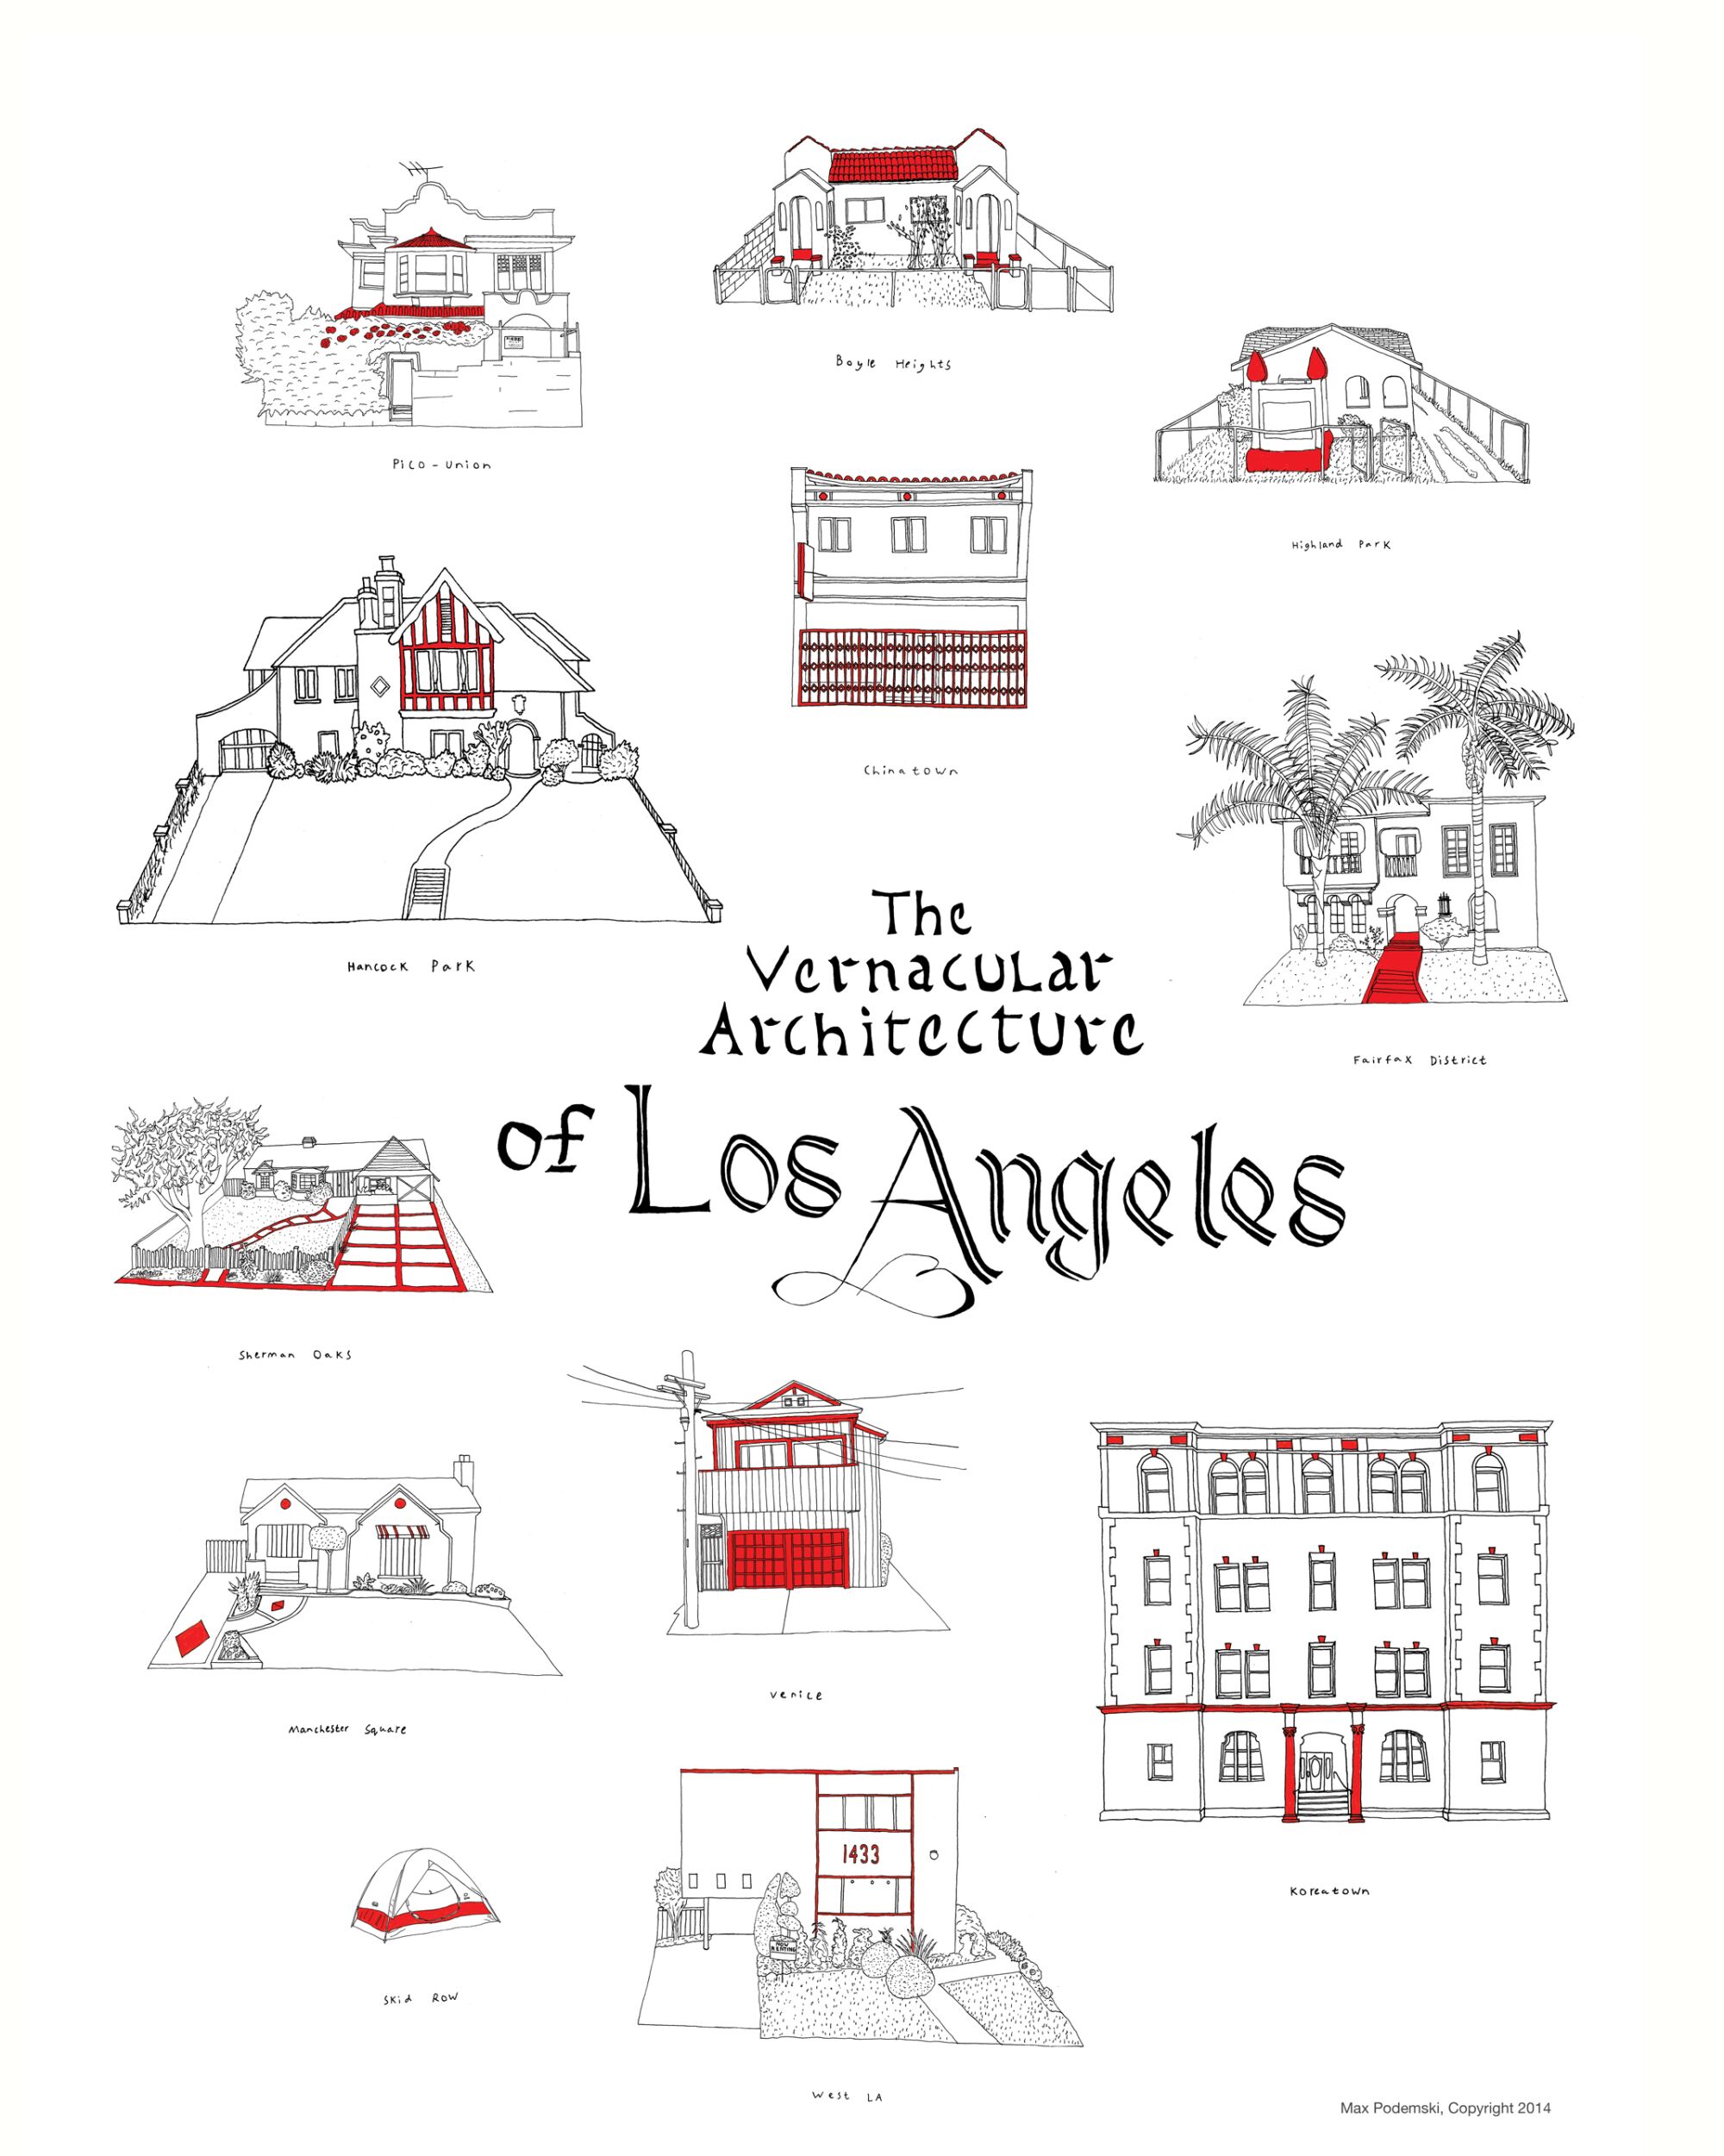 A poster "The Vernacular Architecture of Architecture of Los Angeles"